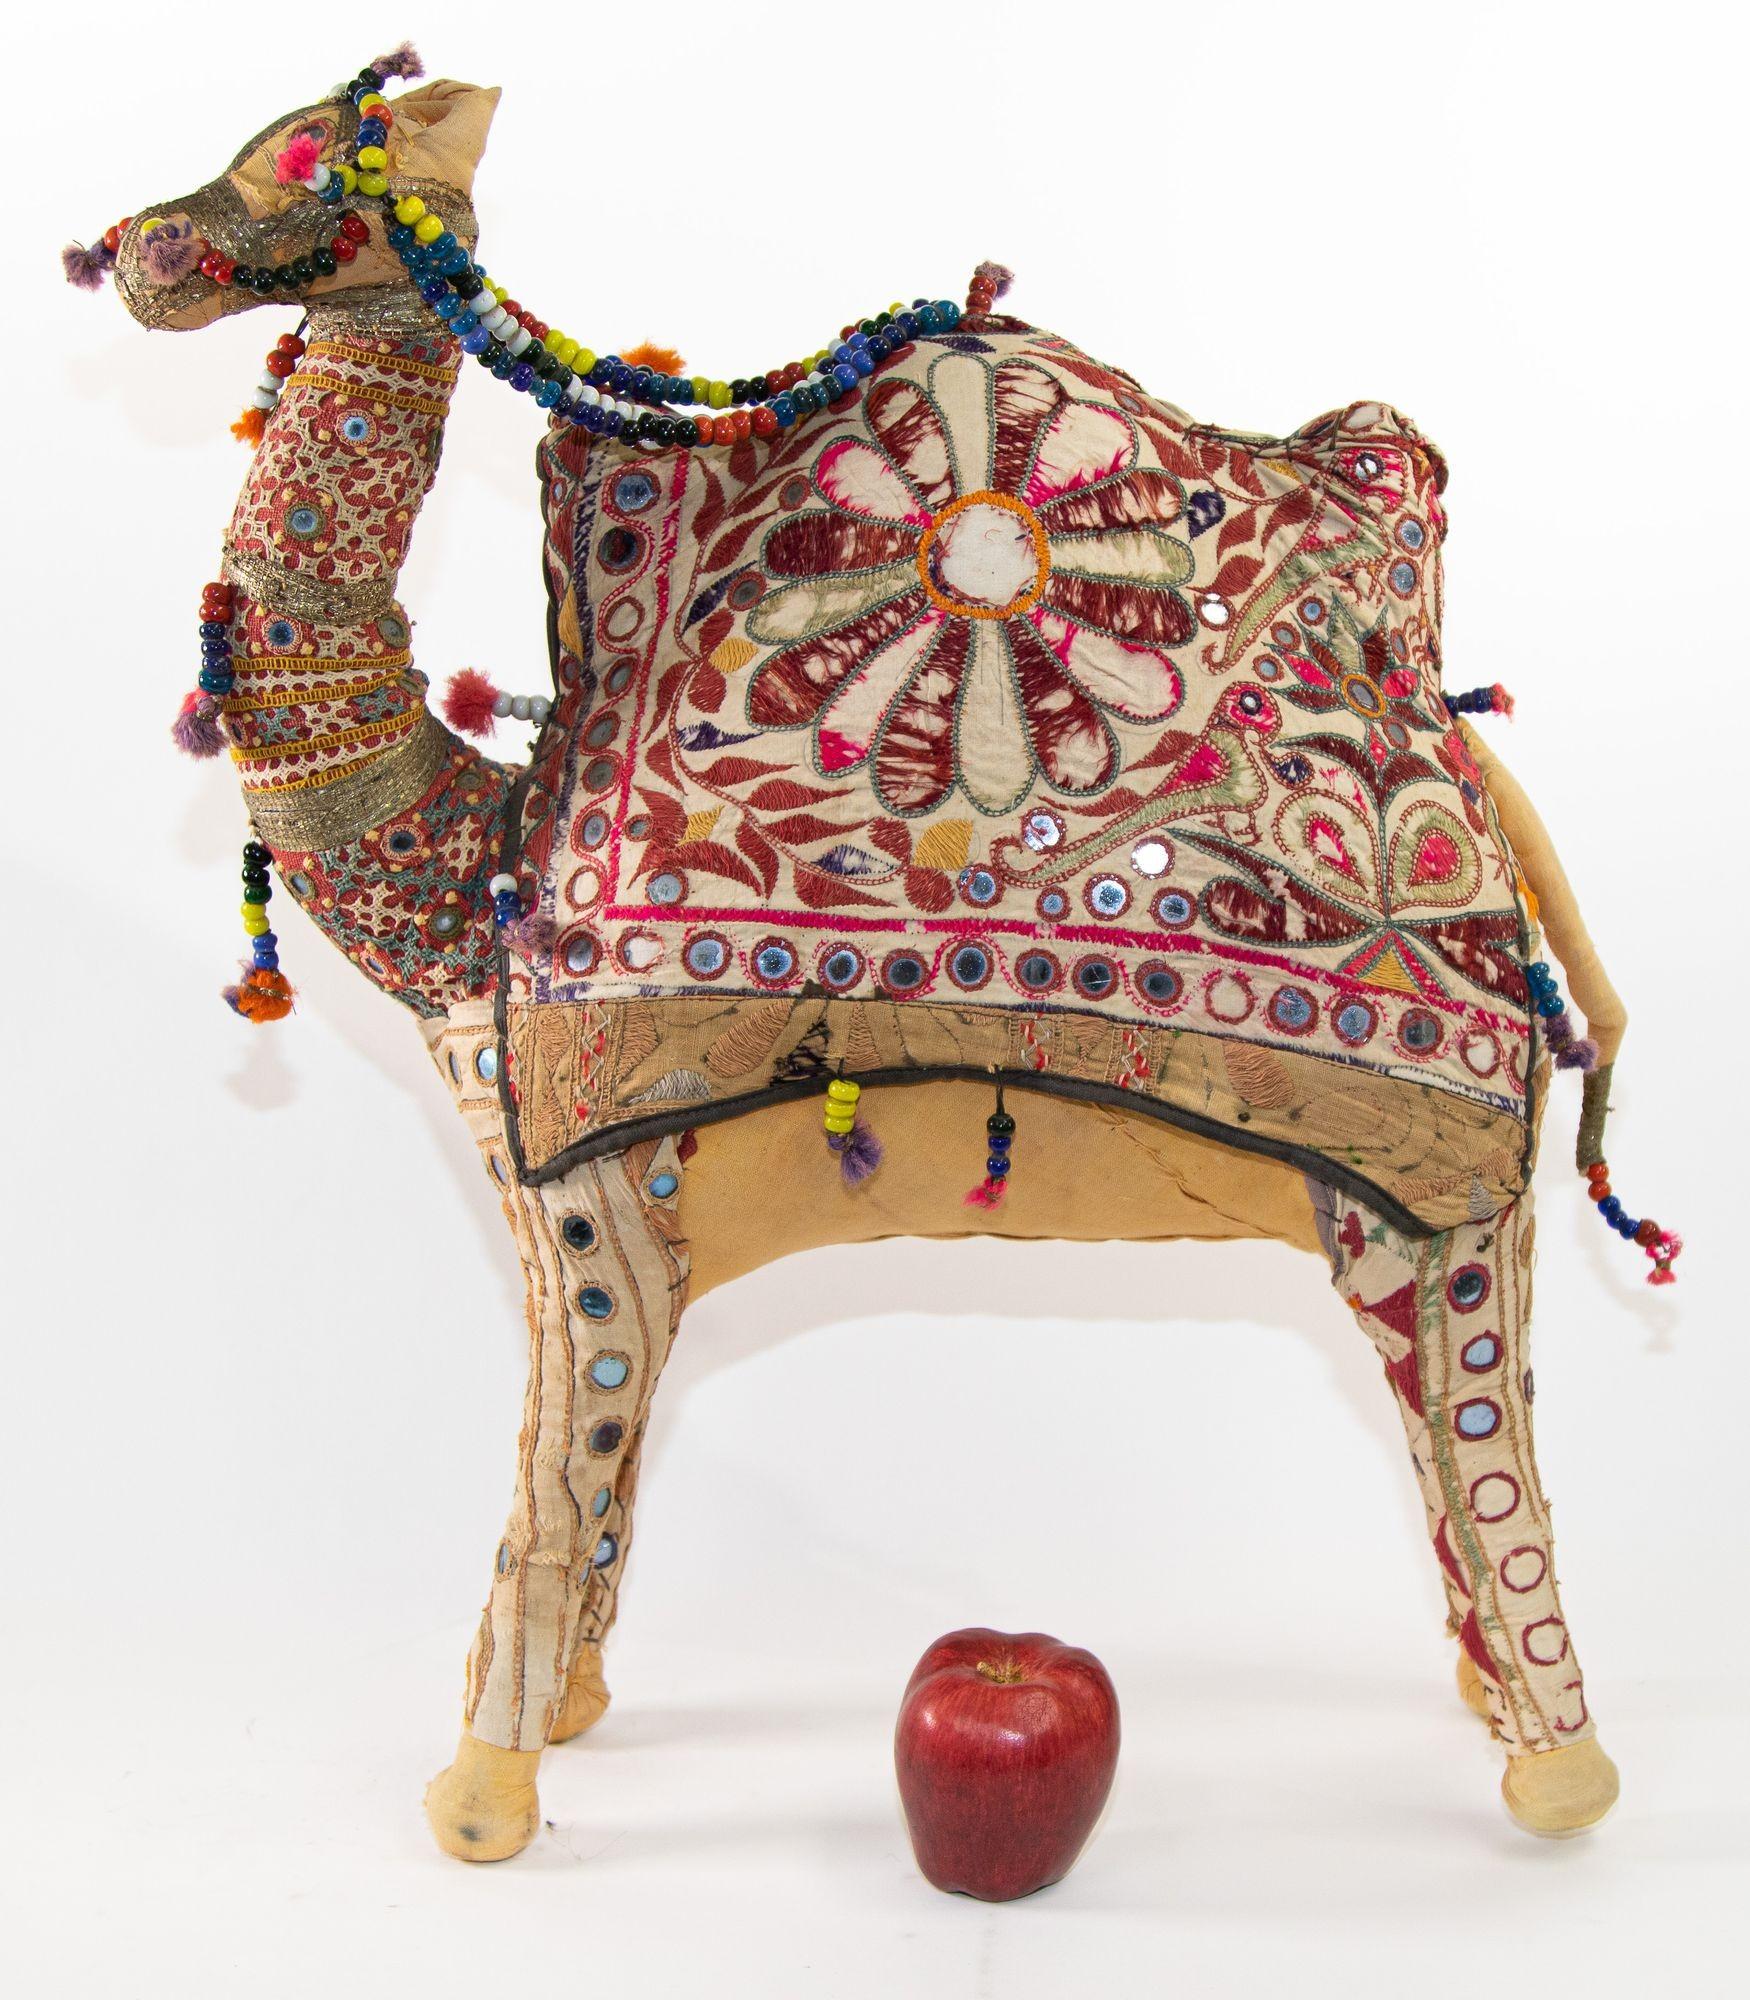 Vintage Raj embroidered large camel toy, India, 1950.
Handmade in Rajasthan, India, colorful fabric camel toy.
Vintage oversized camel stuffed cotton embroidered and decorated with small mirrors, great collector piece.
Anglo Raj, large stuffed